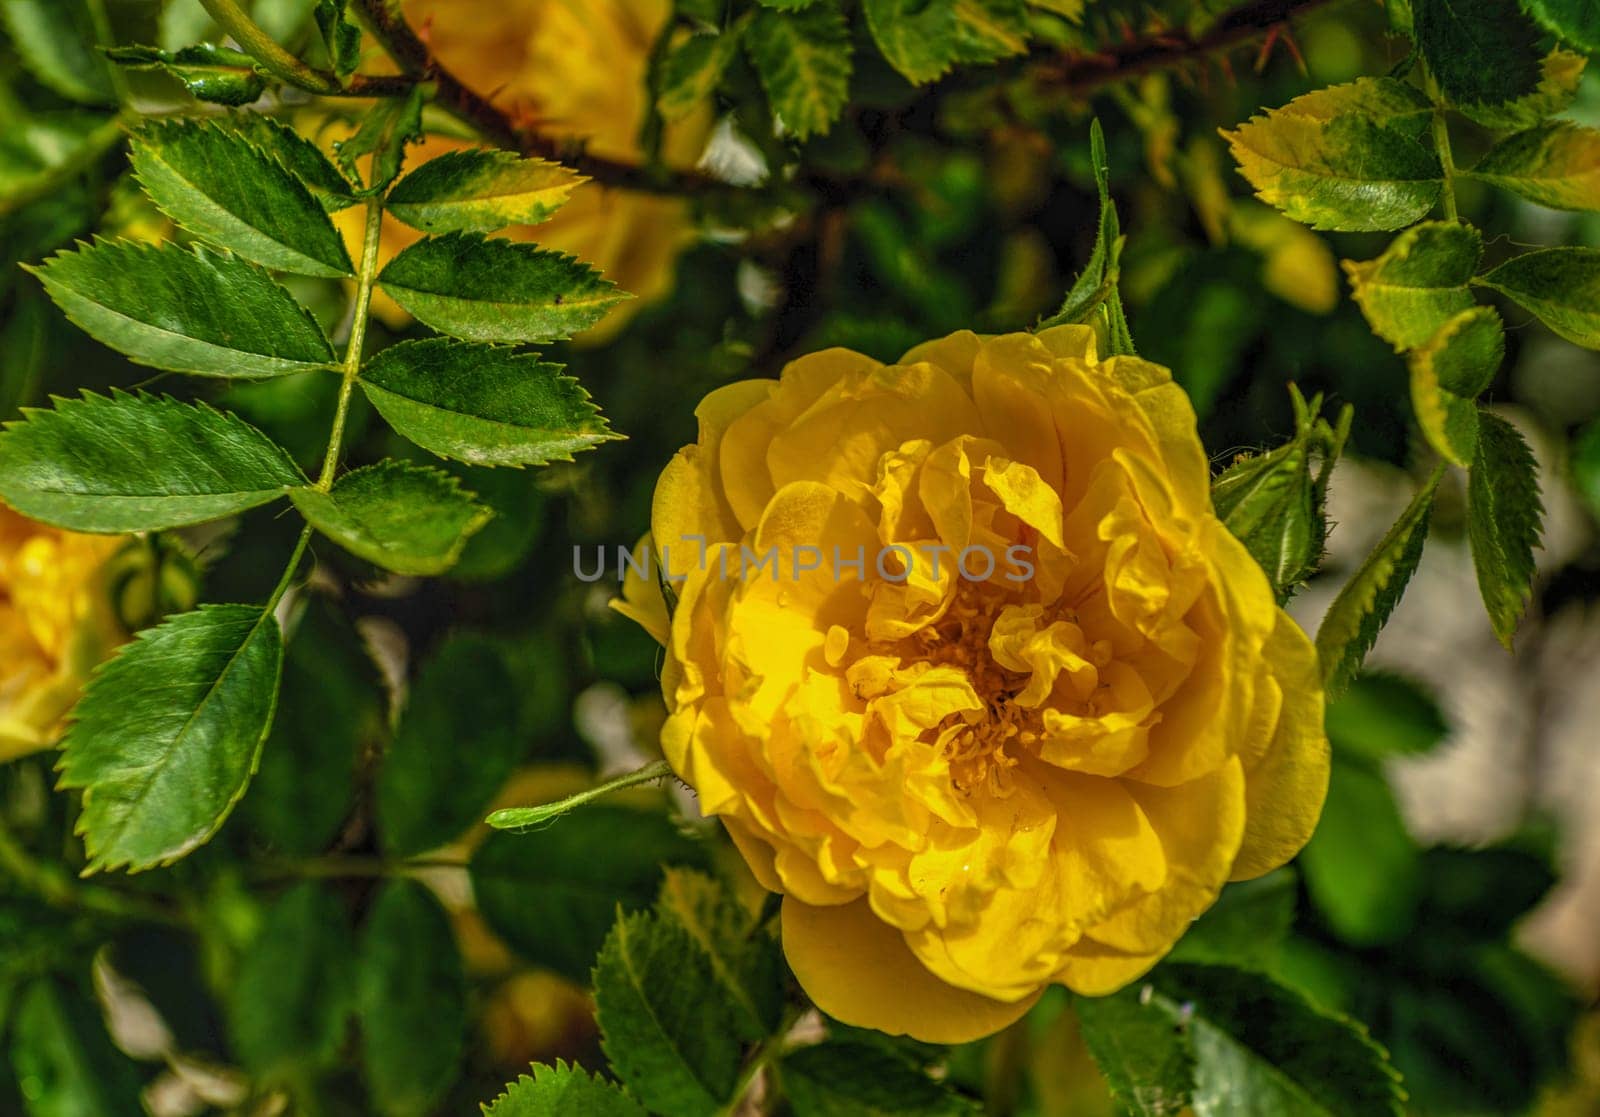 Golden celebration yellow rose bush on green leaves background on a sunny spring day